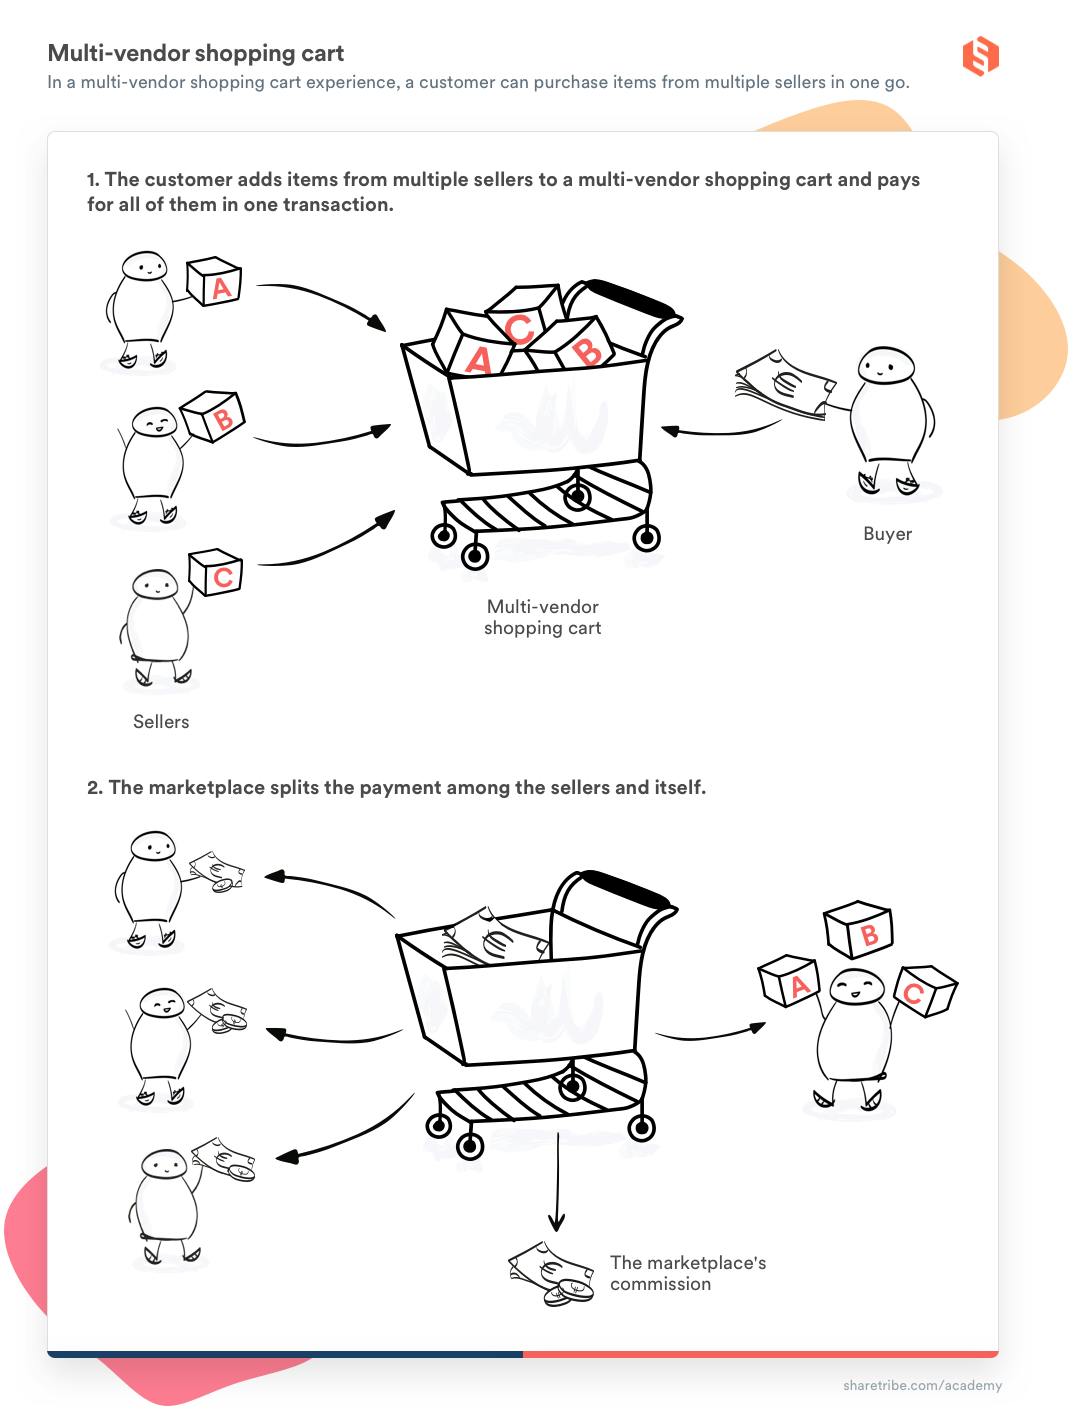 A two-part image visualizing a multi-vendor shopping cart. Part 1: The customer adds items from multiple sellers to a multi-vendor shopping cart and pays for all of them in one transaction.The text is visualized as follows: On the left, there are three sellers with boxes. The boxes are placed in a shopping cart. On the right side of the cart, a buyer figure is offering euro notes.Part 2: The marketplace splits the payment among the sellers and itself.This is visualized by the customer happily holding the boxes that are no longer in the shopping cart. The cart now holds the customer's money. The money is split between the sellers, who all now hold a small amount of the money in notes and coins. The marketplace's commission is below the cart.